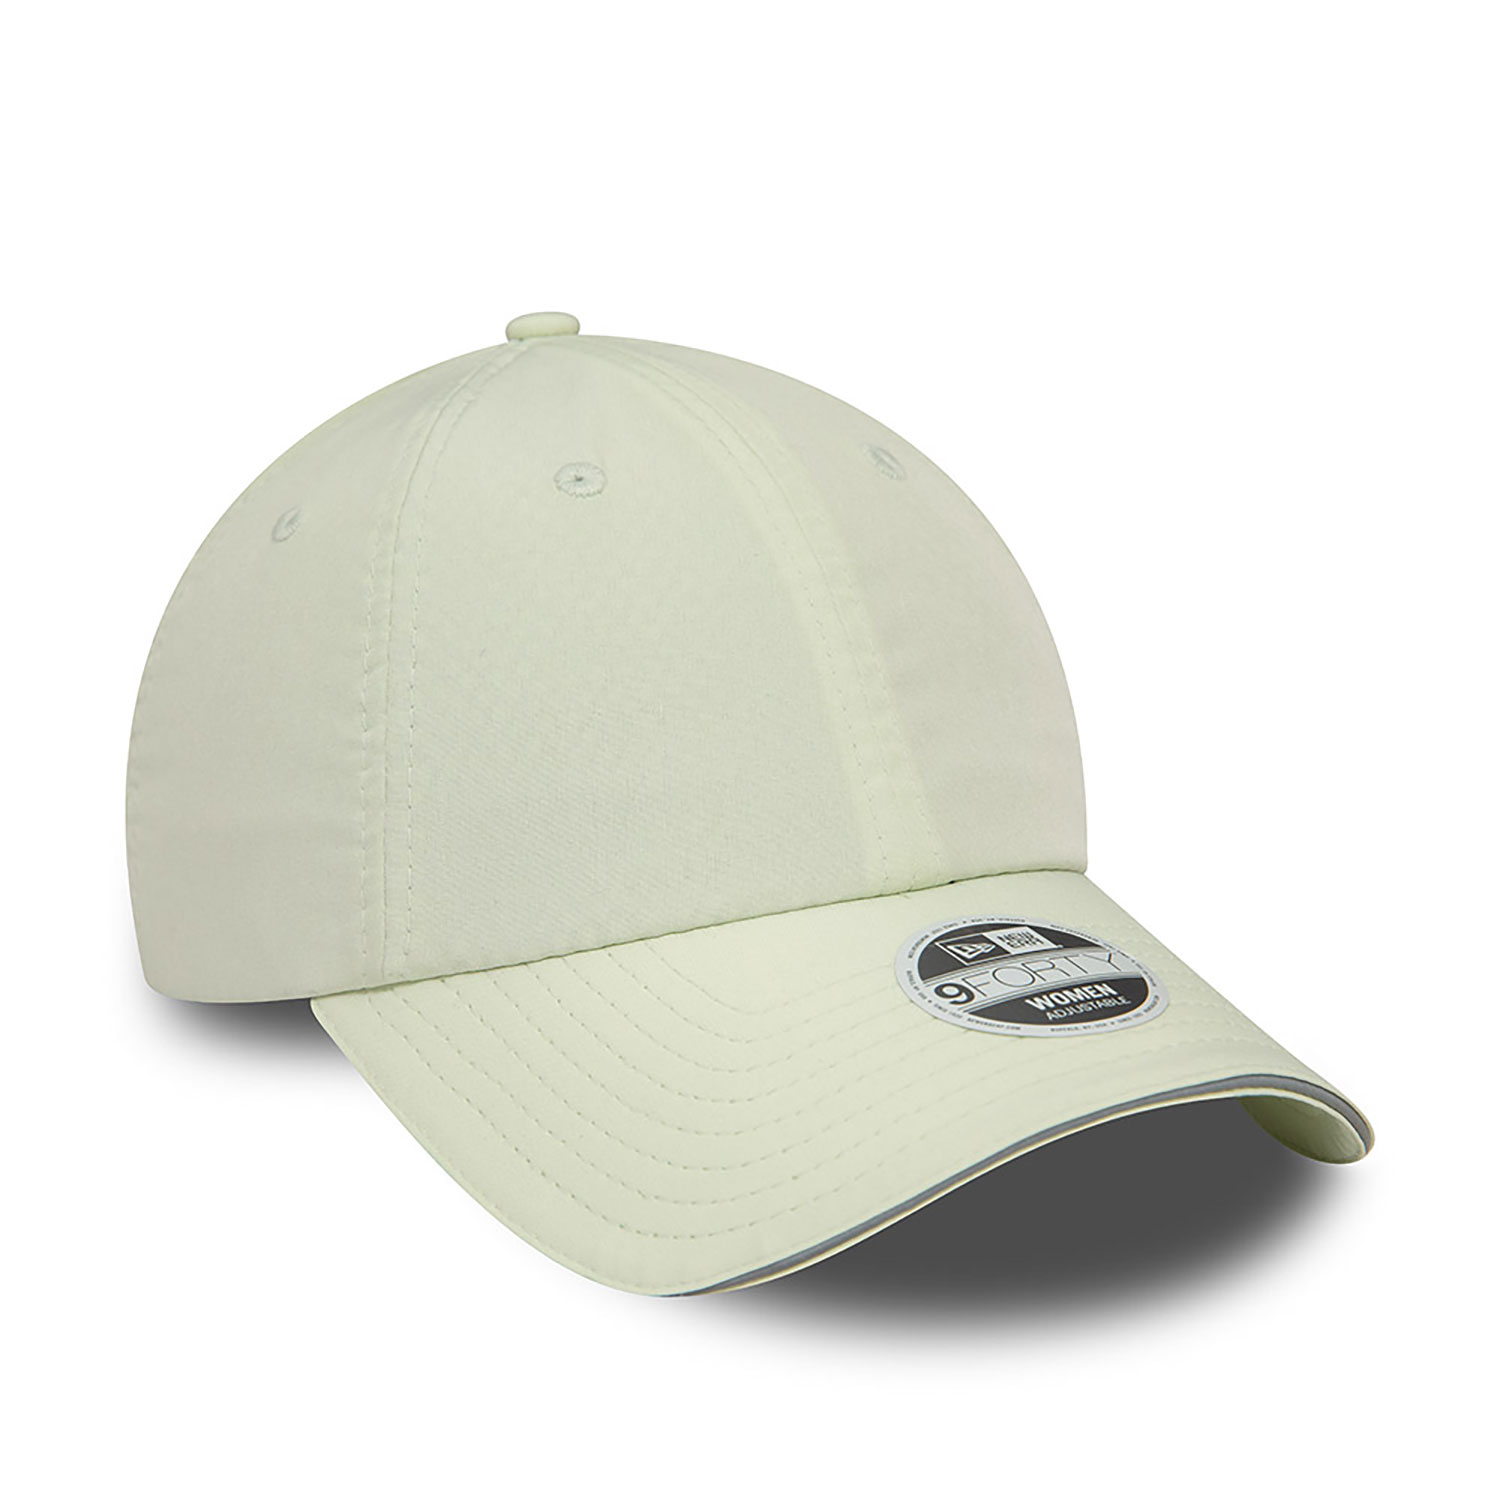 New Era Womens Ponytail Open Back Mint Green 9FORTY Adjustable Cap